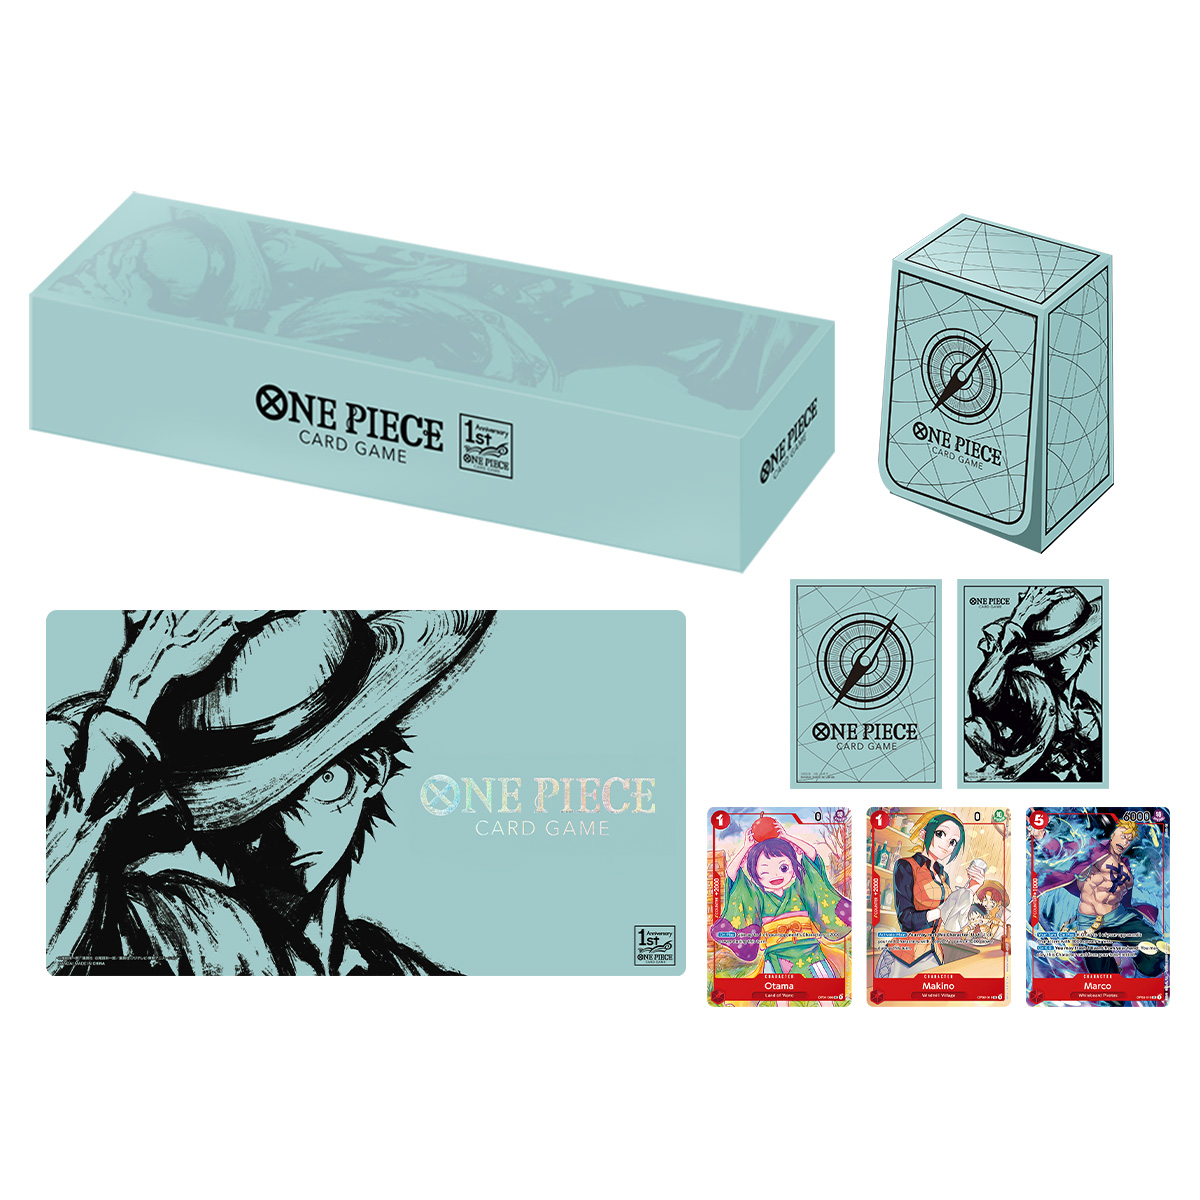 ONE PIECE CARD GAME 1st ANNIVERSARY-